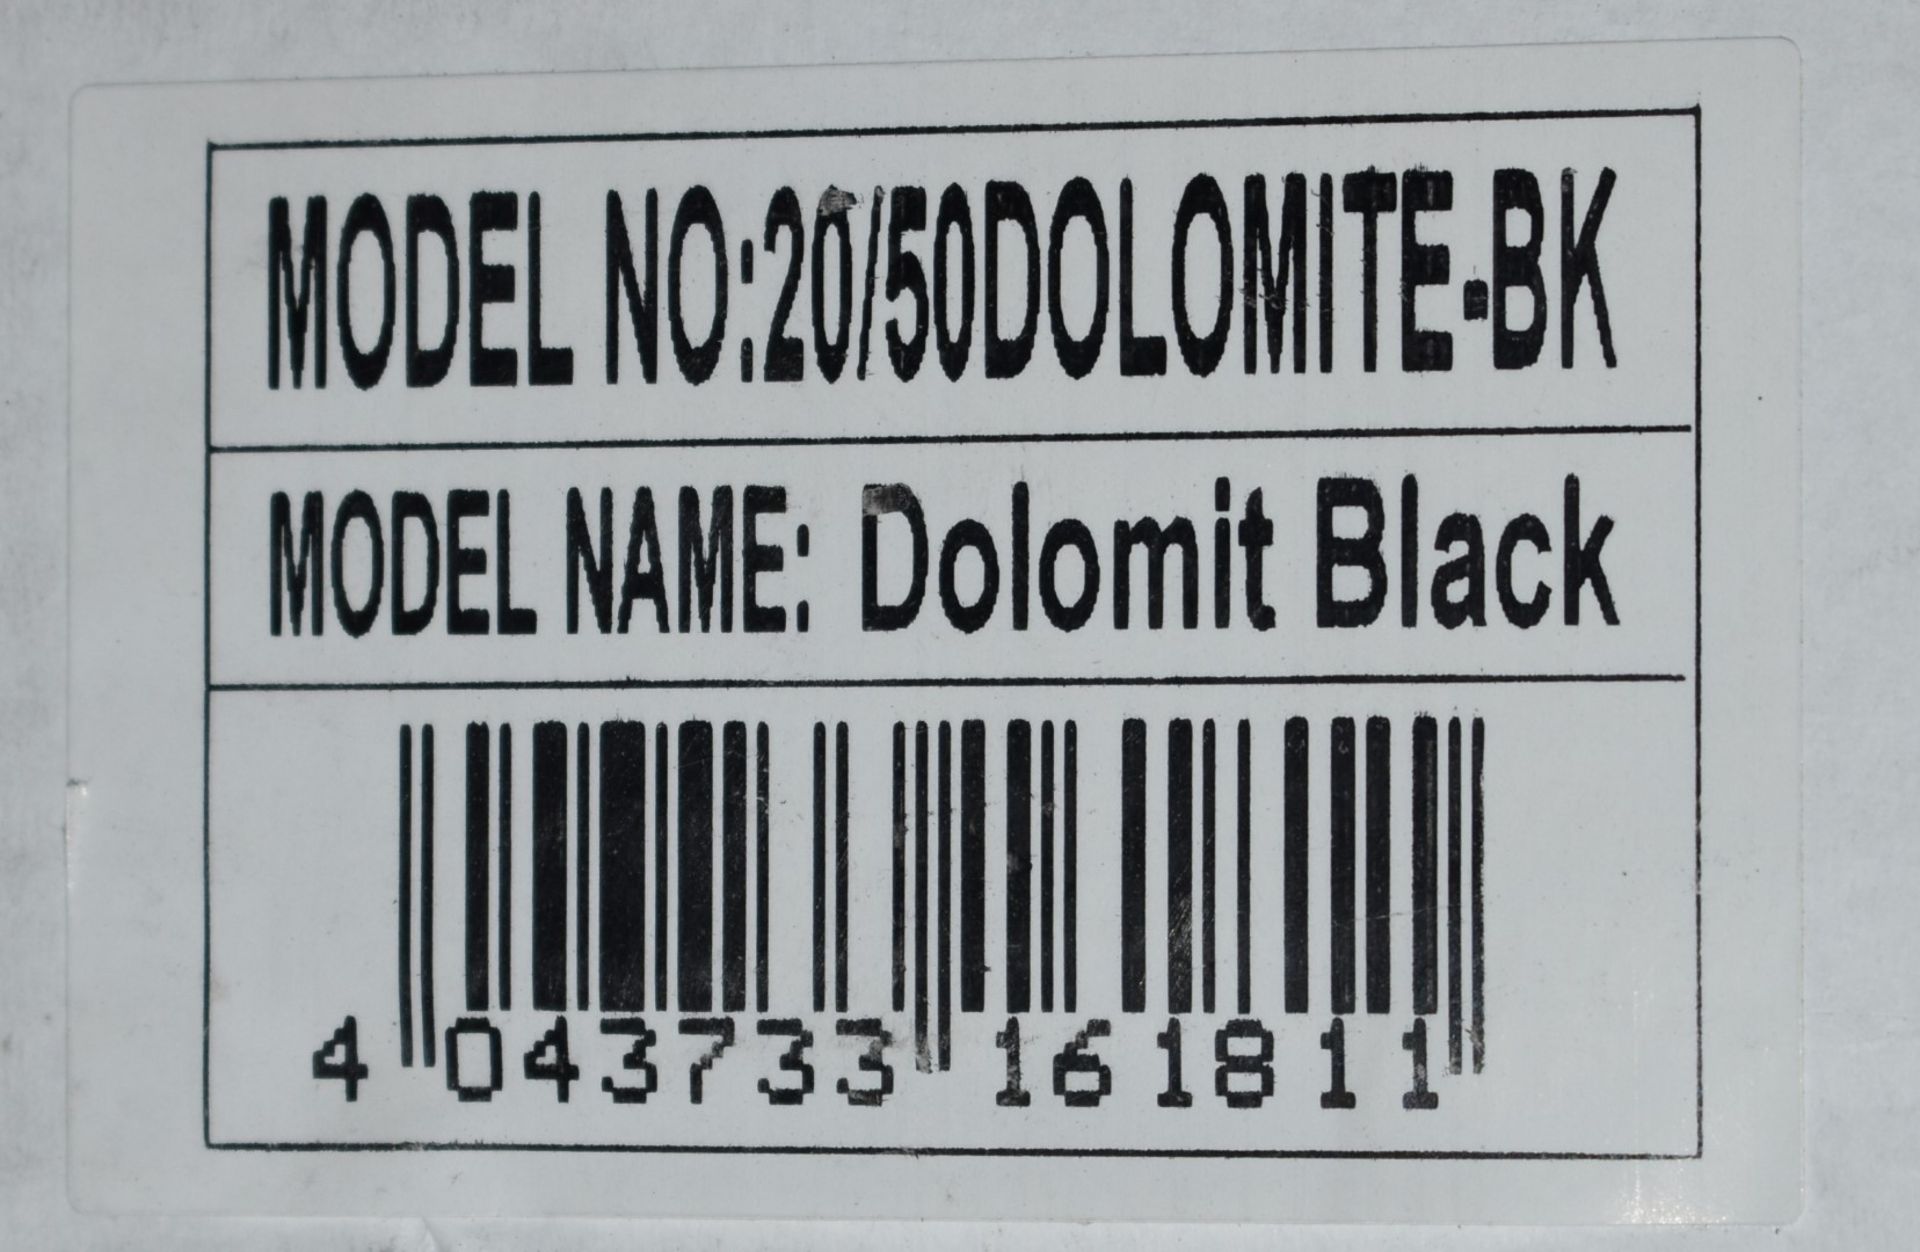 6 x Boxes of RAK Porcelain Floor or Wall Tiles - Dolomit Black - 20 x 50 cm Tiles Covering a Total - Image 5 of 9